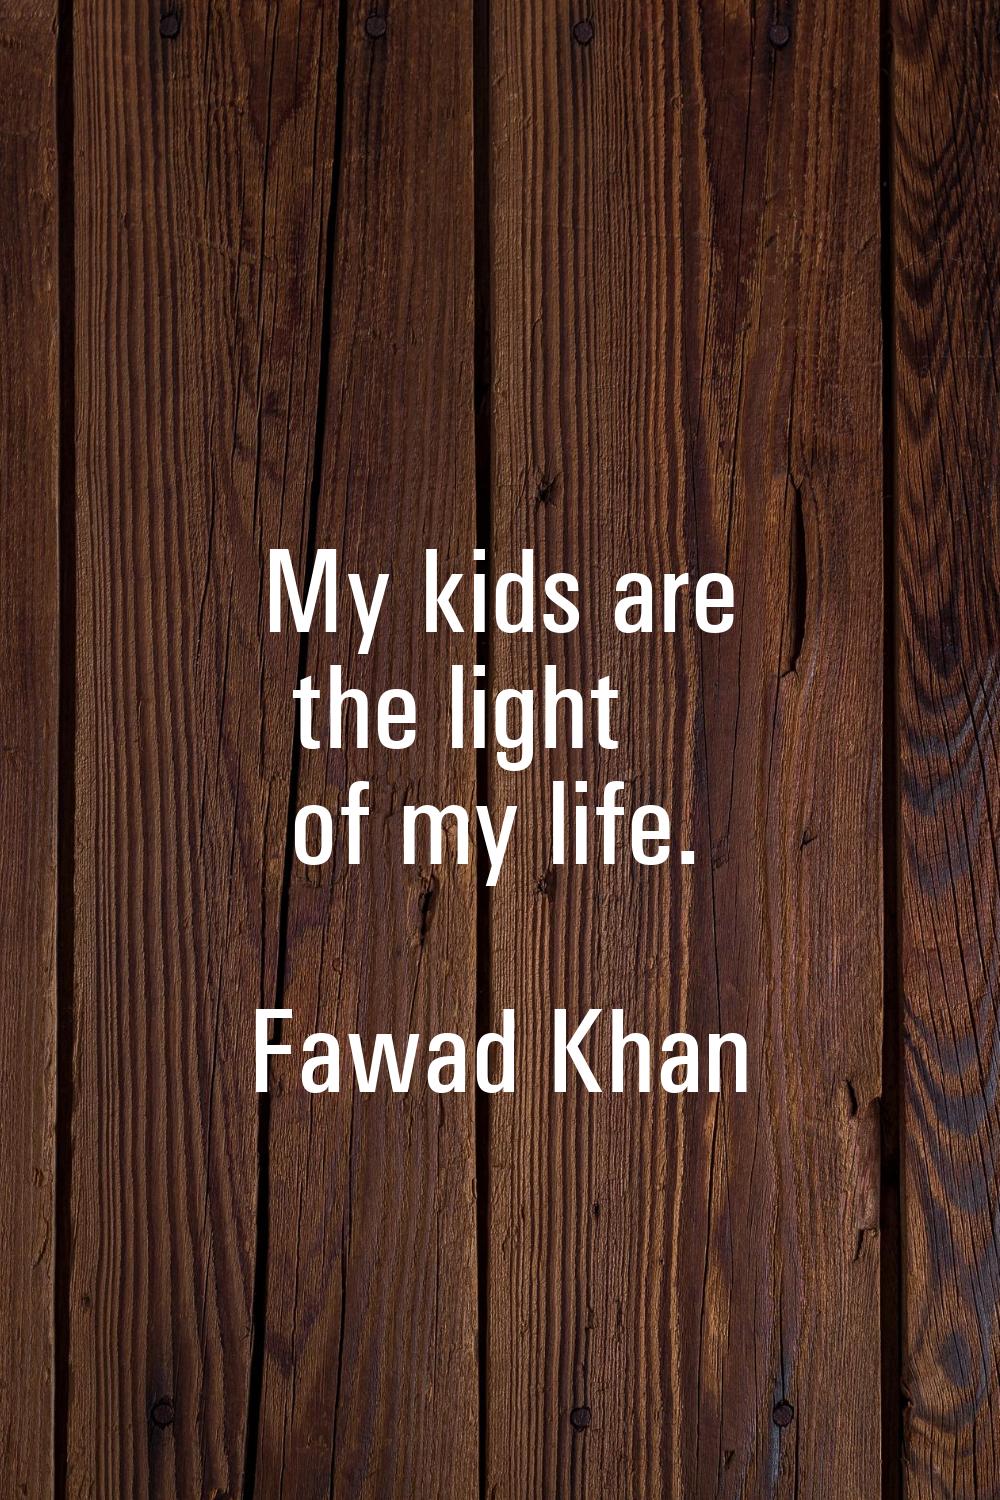 My kids are the light of my life.